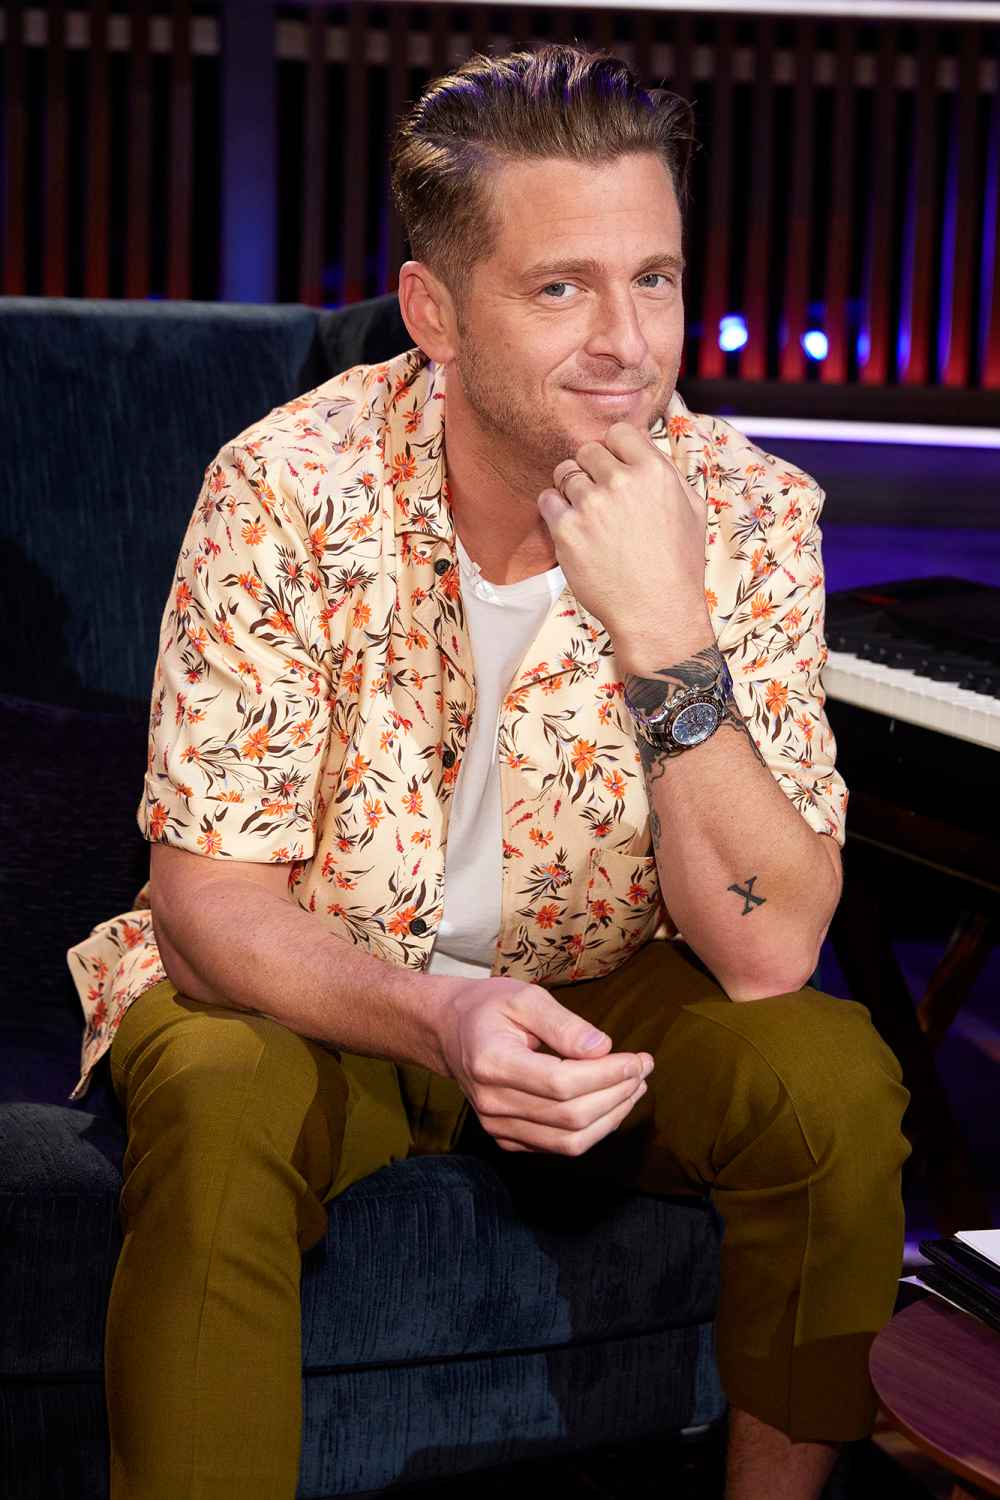 Ryan Tedder Calls Out Artists Releasing Non-Charity Music During the Coronavirus Pandemic